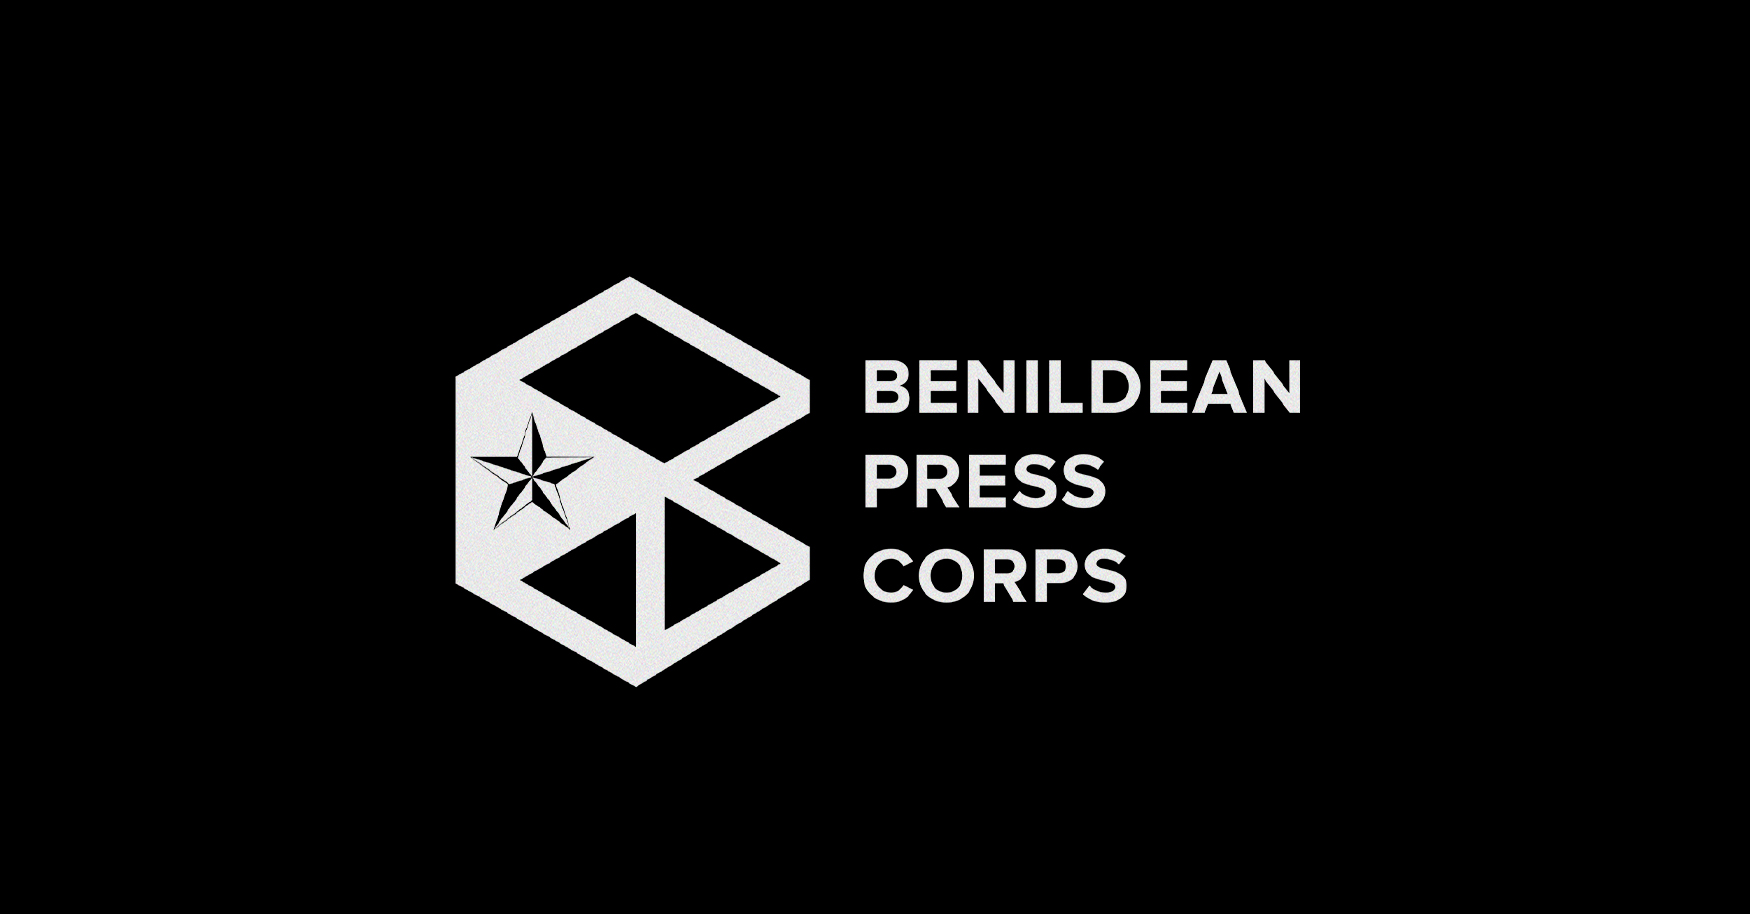 Cover Photo By Benildean Press Corps